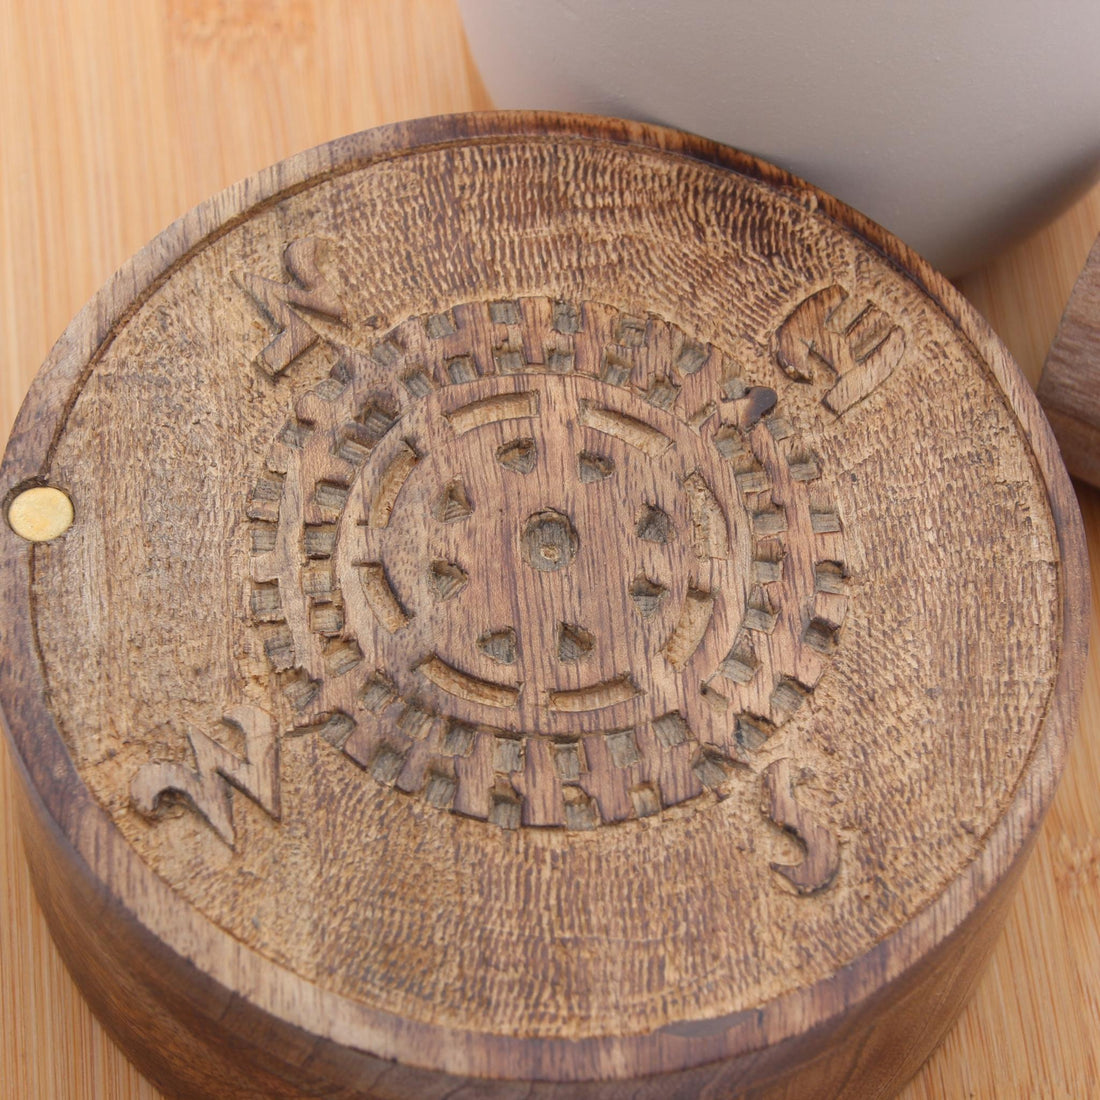 Table and Kitchen fair trade ethical sustainable fashion Hand Carved Timber Trinket Box conscious purchase Matr Boomie